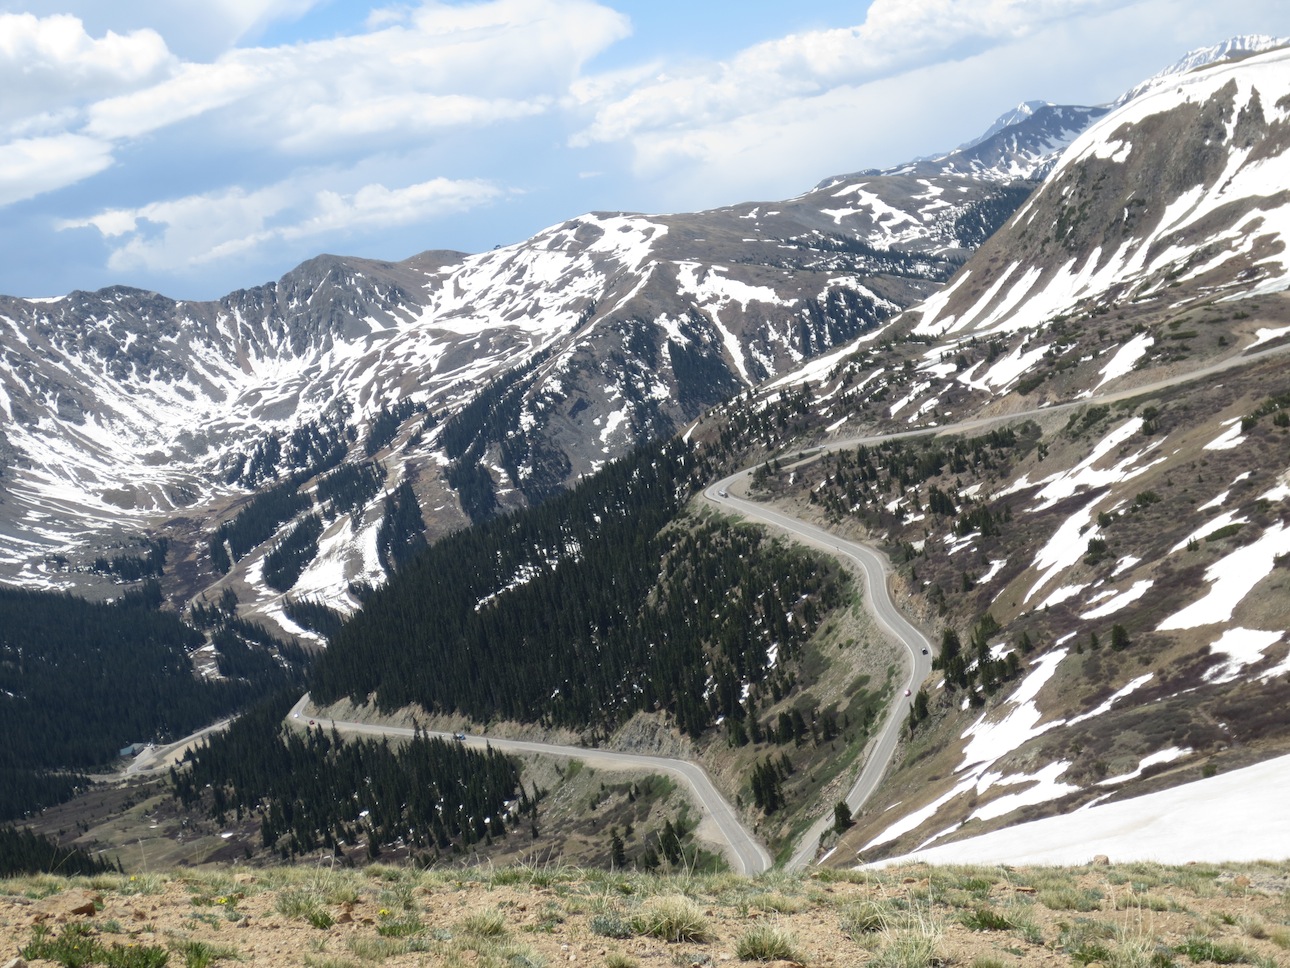 Winding road out of Loveland Pass.